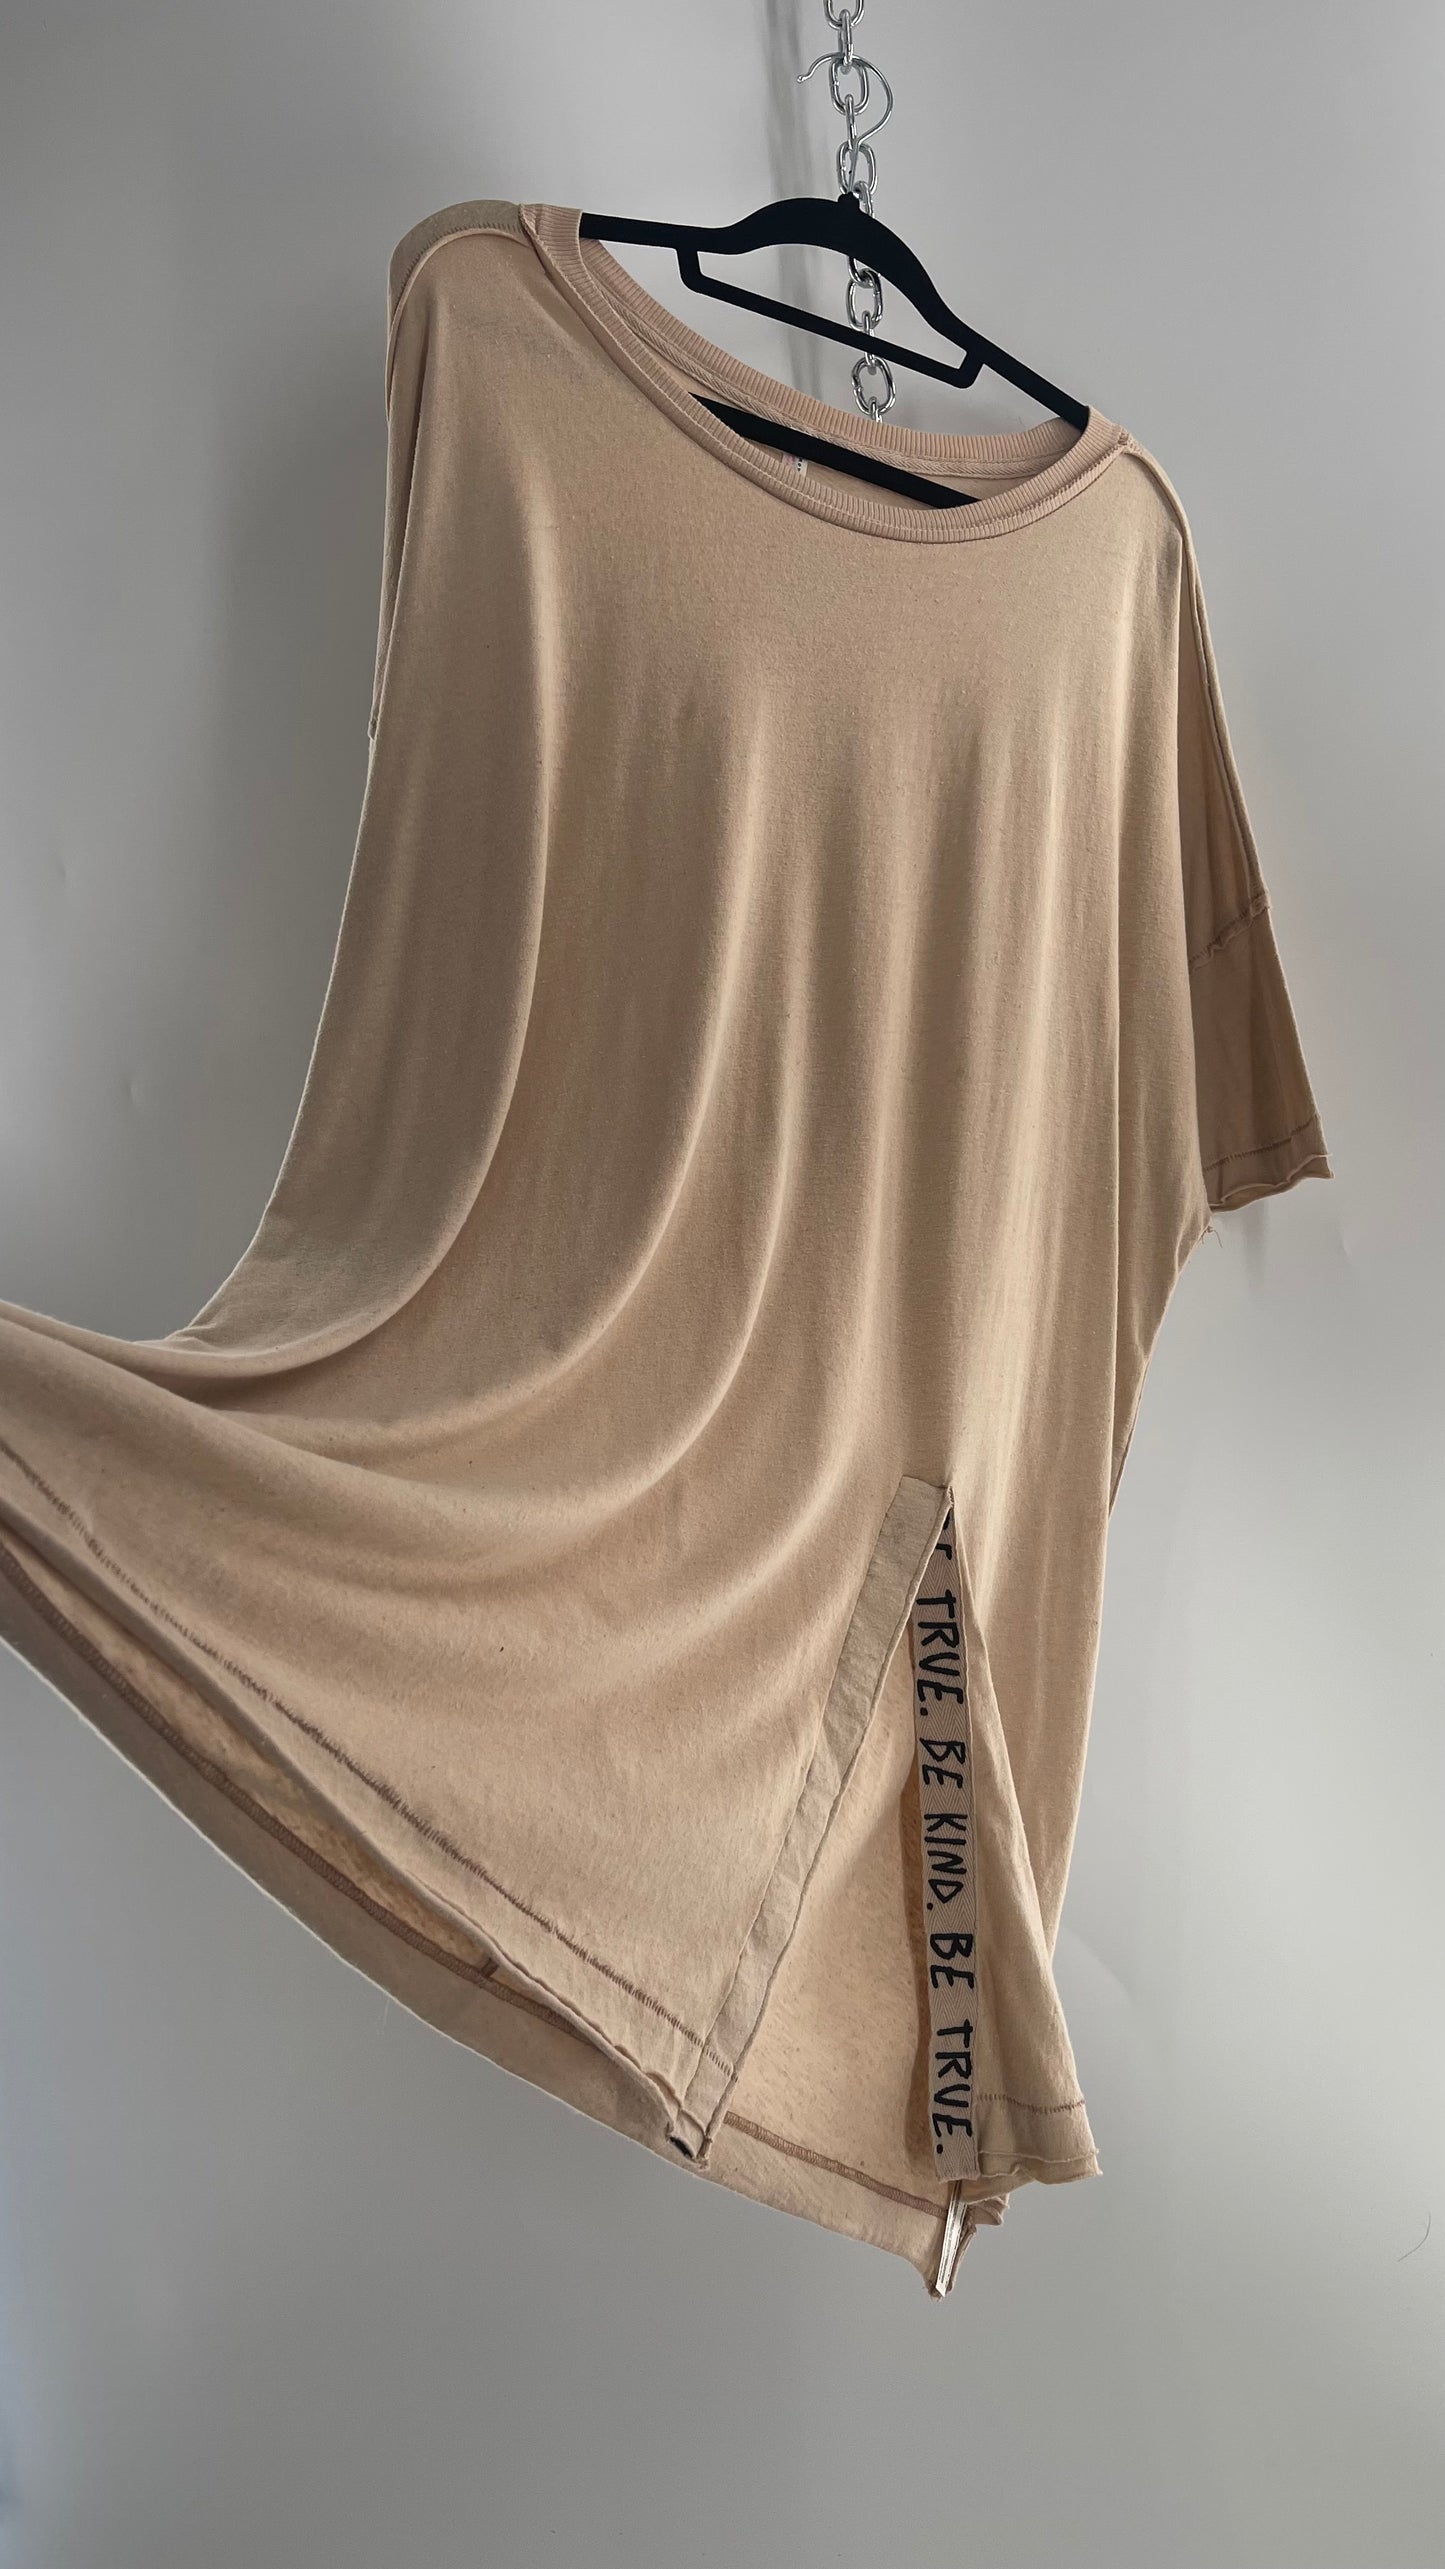 Free People Movement Oversized Light Beige Short  Sleeve T-Shirt with Slit Embroidered Detail (Size XS)